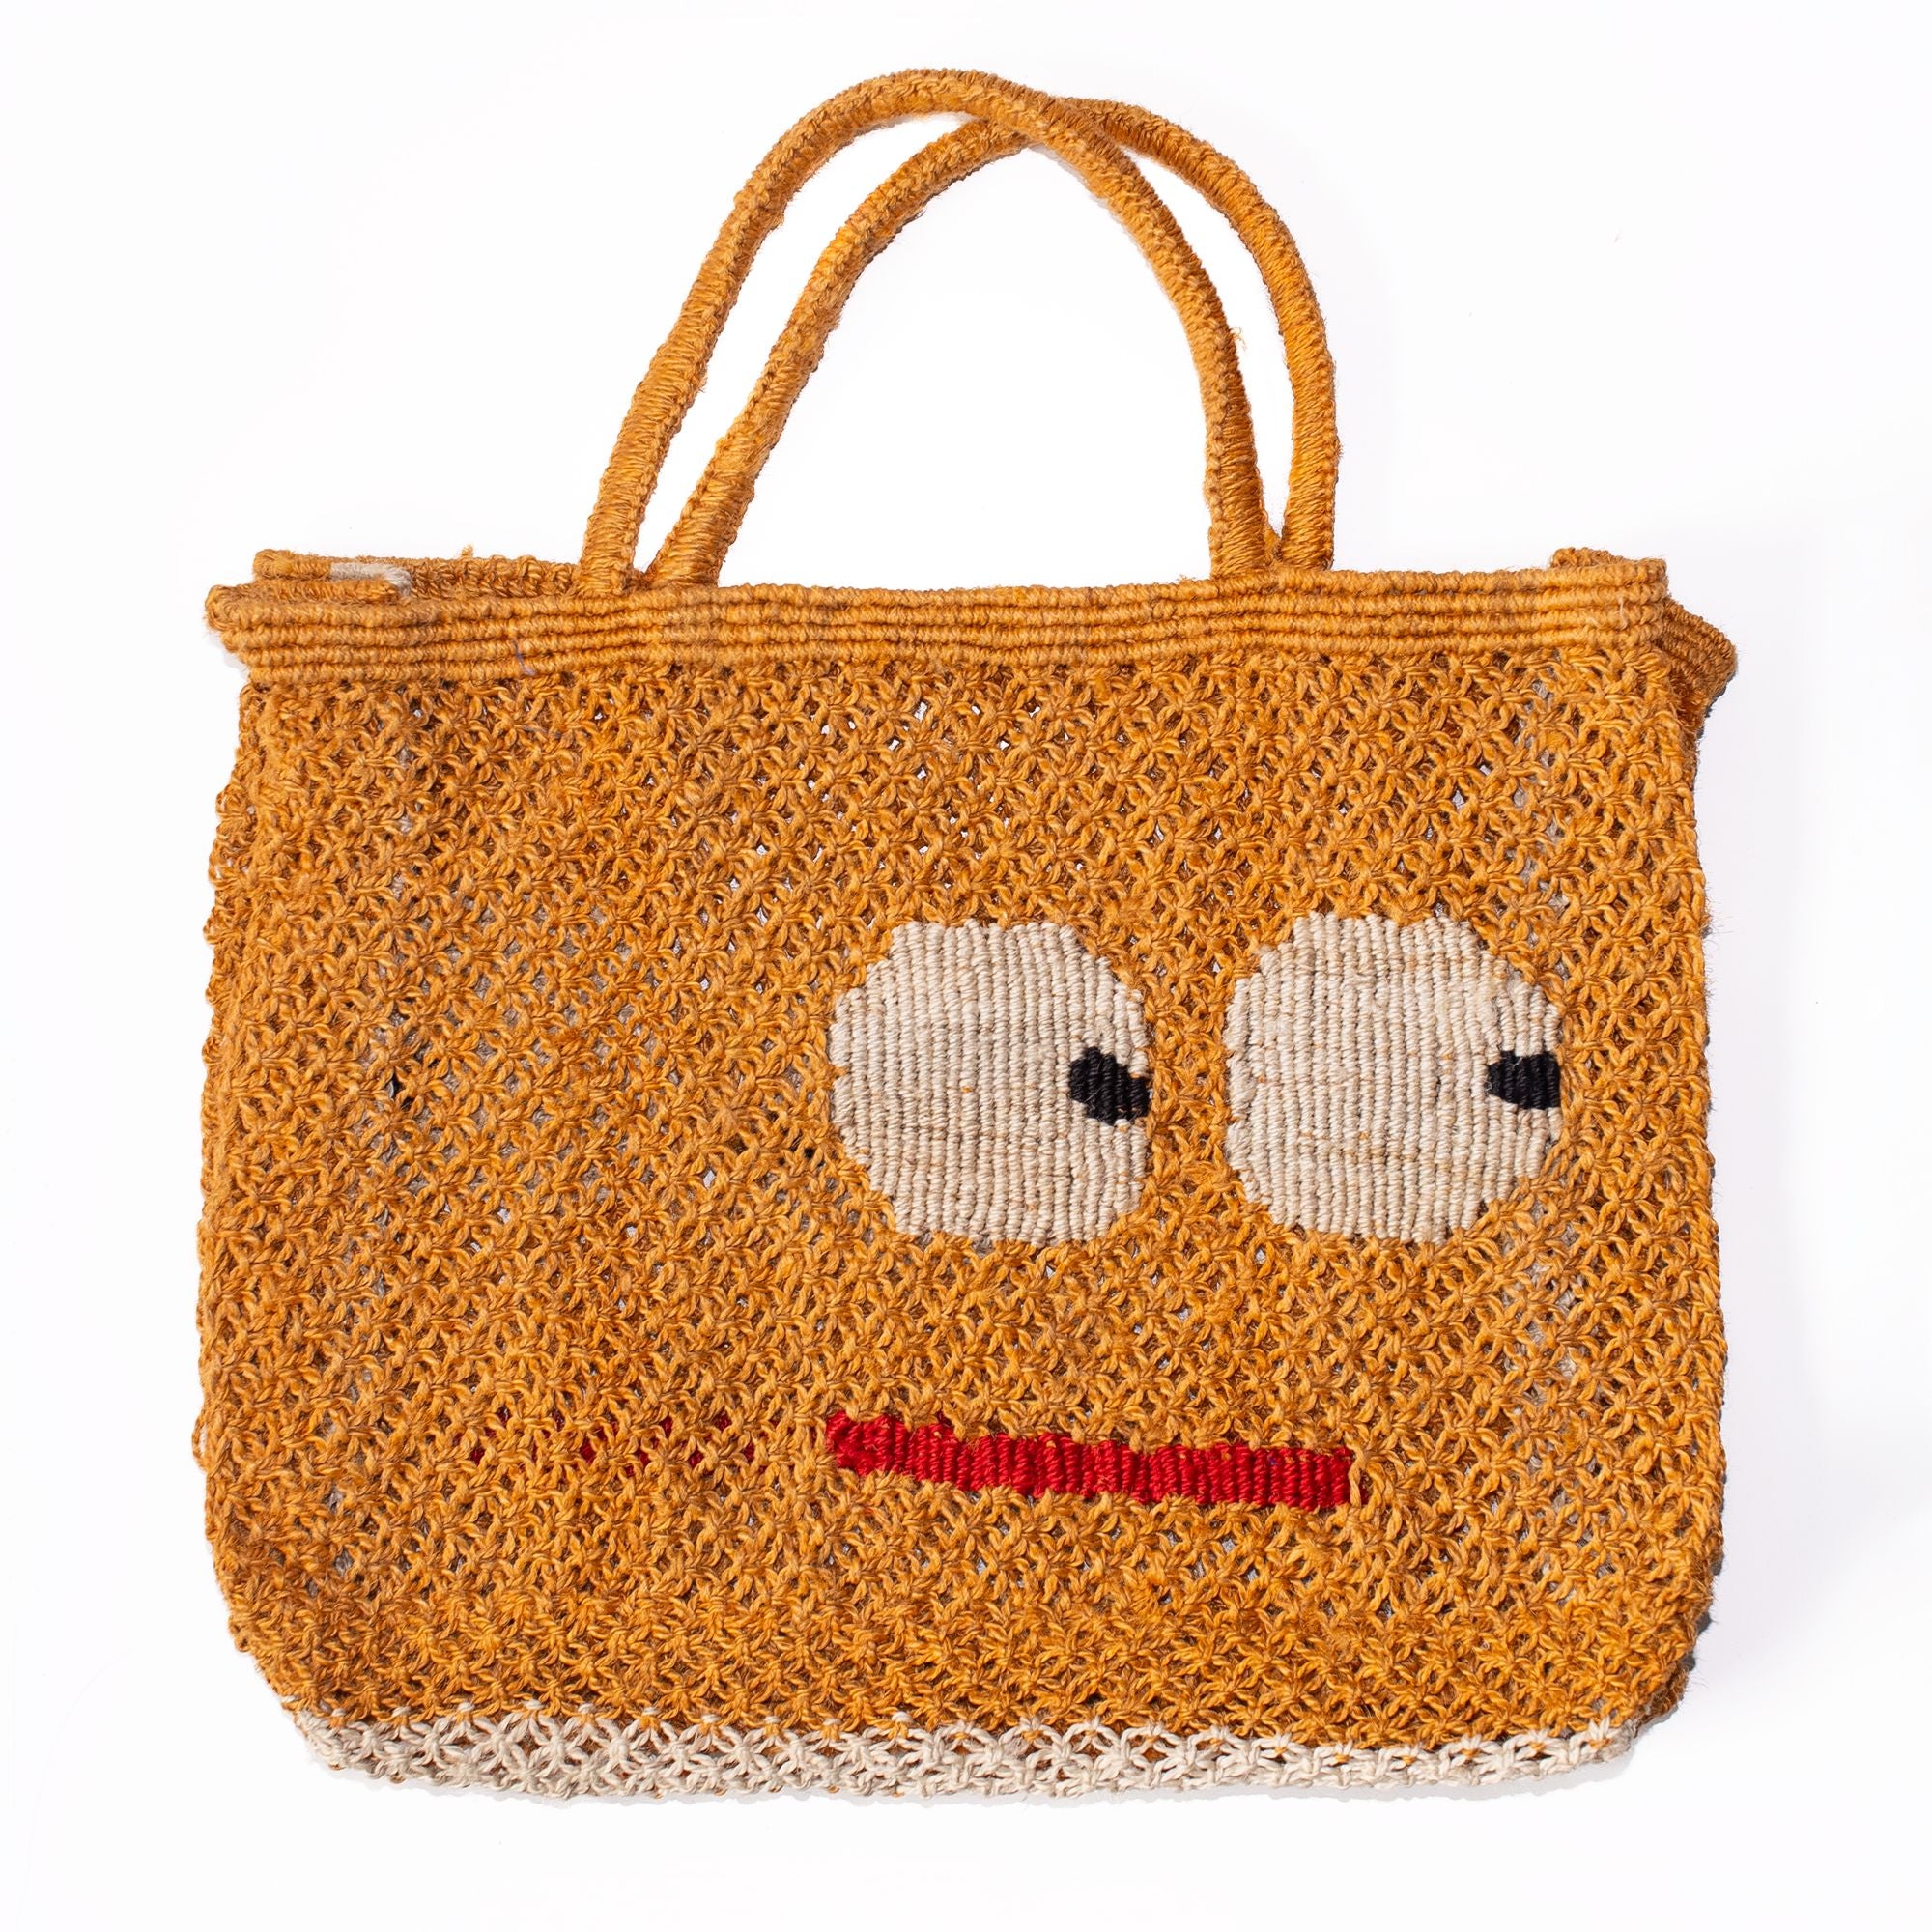 Big Eyes Bag, from The Jacksons – Clic